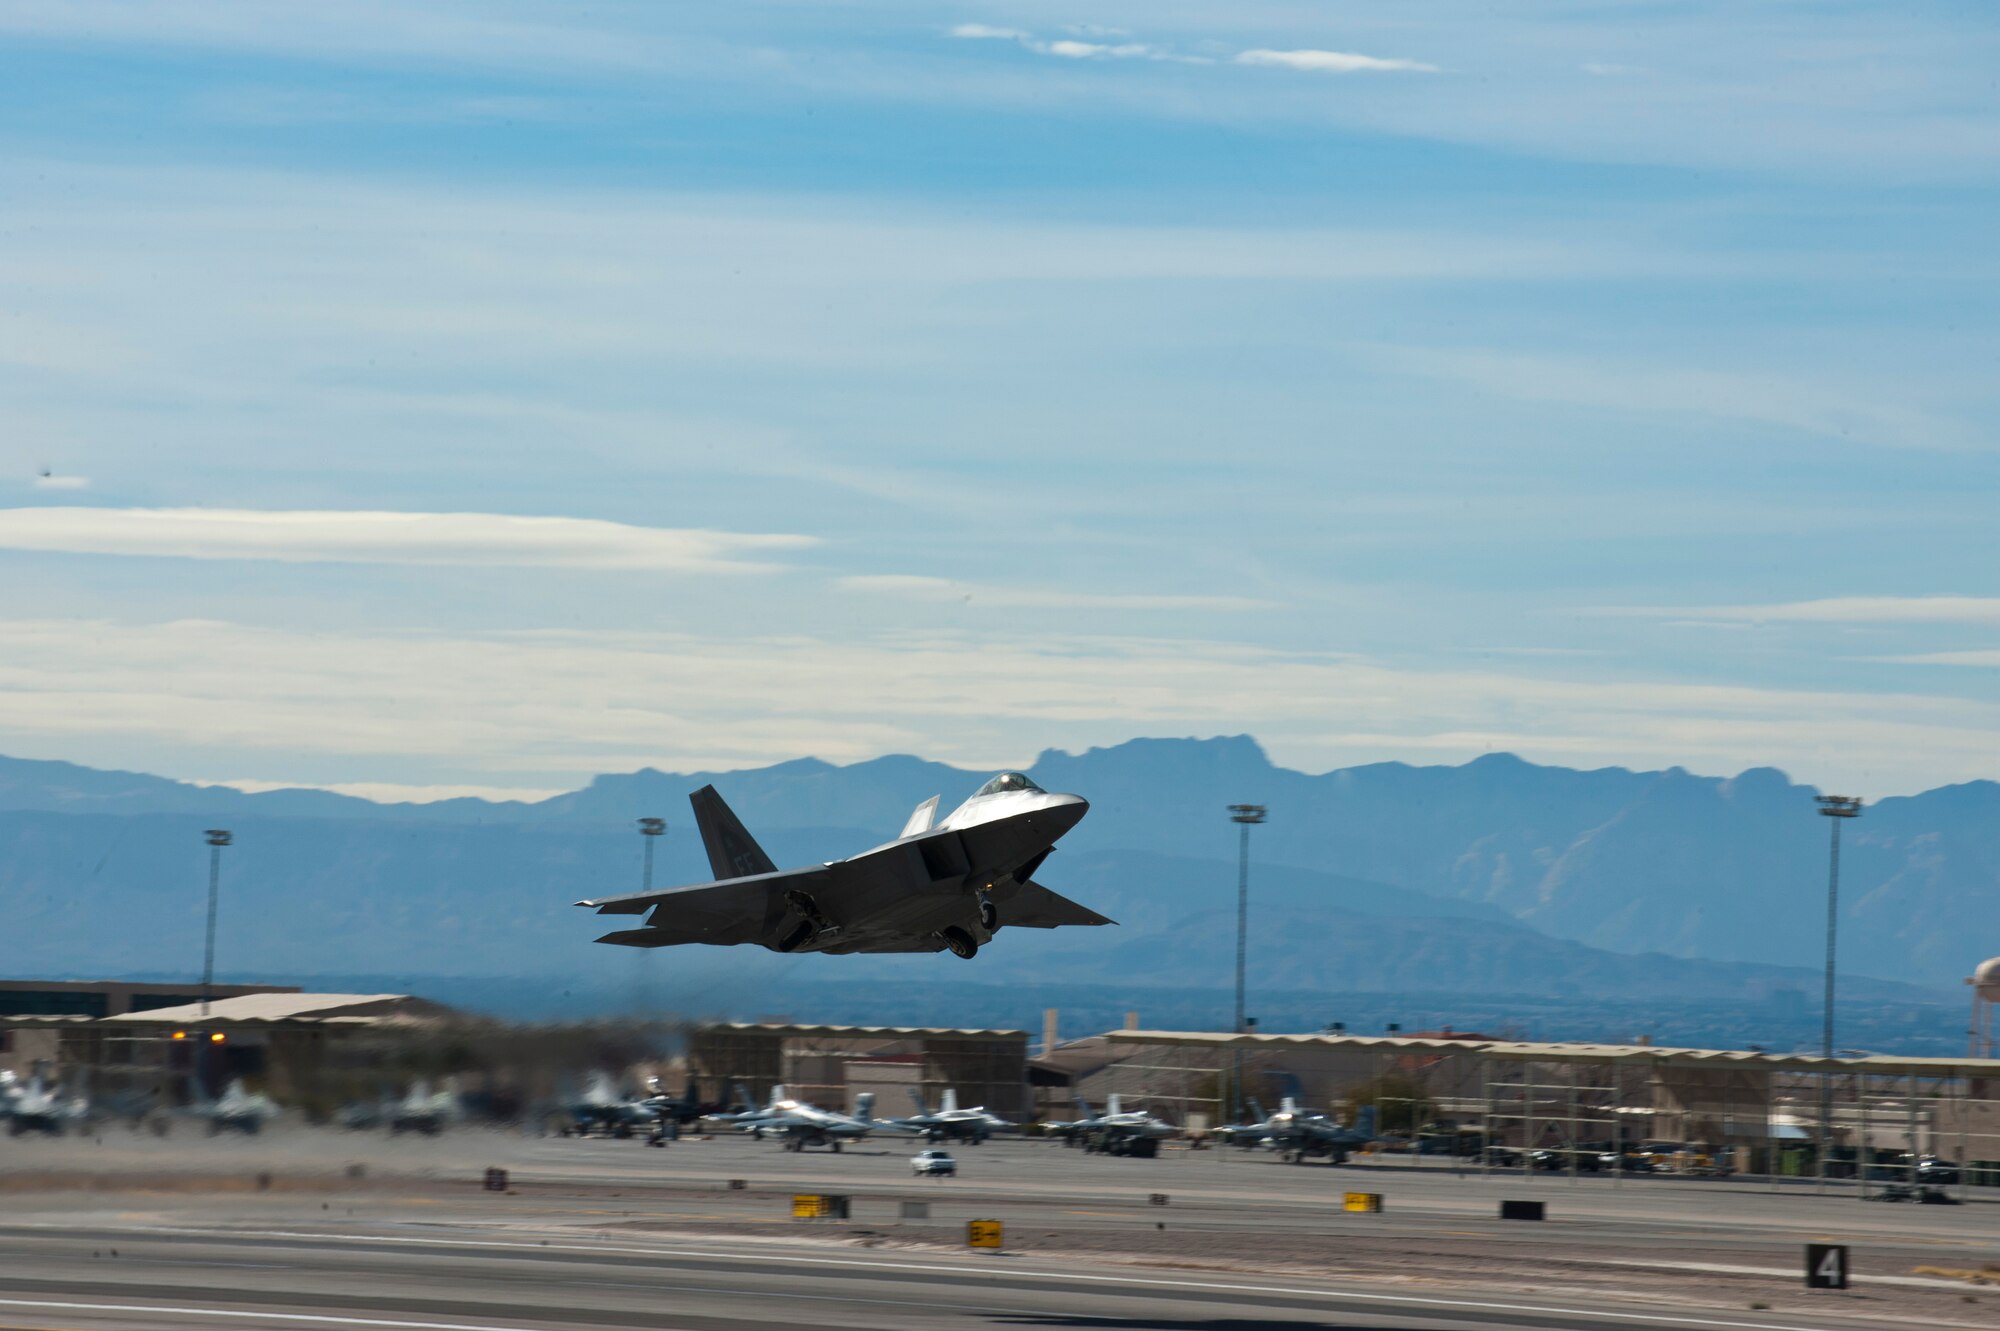 A U.S. Air Force F-22 Raptor assigned to Joint Base Langley-Eustis, Va., takes off during Red Flag 14-1 Jan. 28, 2014, at Nellis AFB, Nev. Red Flag Provides Airmen from U.S. and allied countries an opportunity to experience realistic combat scenarios to prepare and train in the event of future conflicts or war. The training exercise’s missions take place over the 2.9 million acre Nevada Test and Training Range. (U.S. Air Force photo by Airman 1st Class Thomas Spangler)